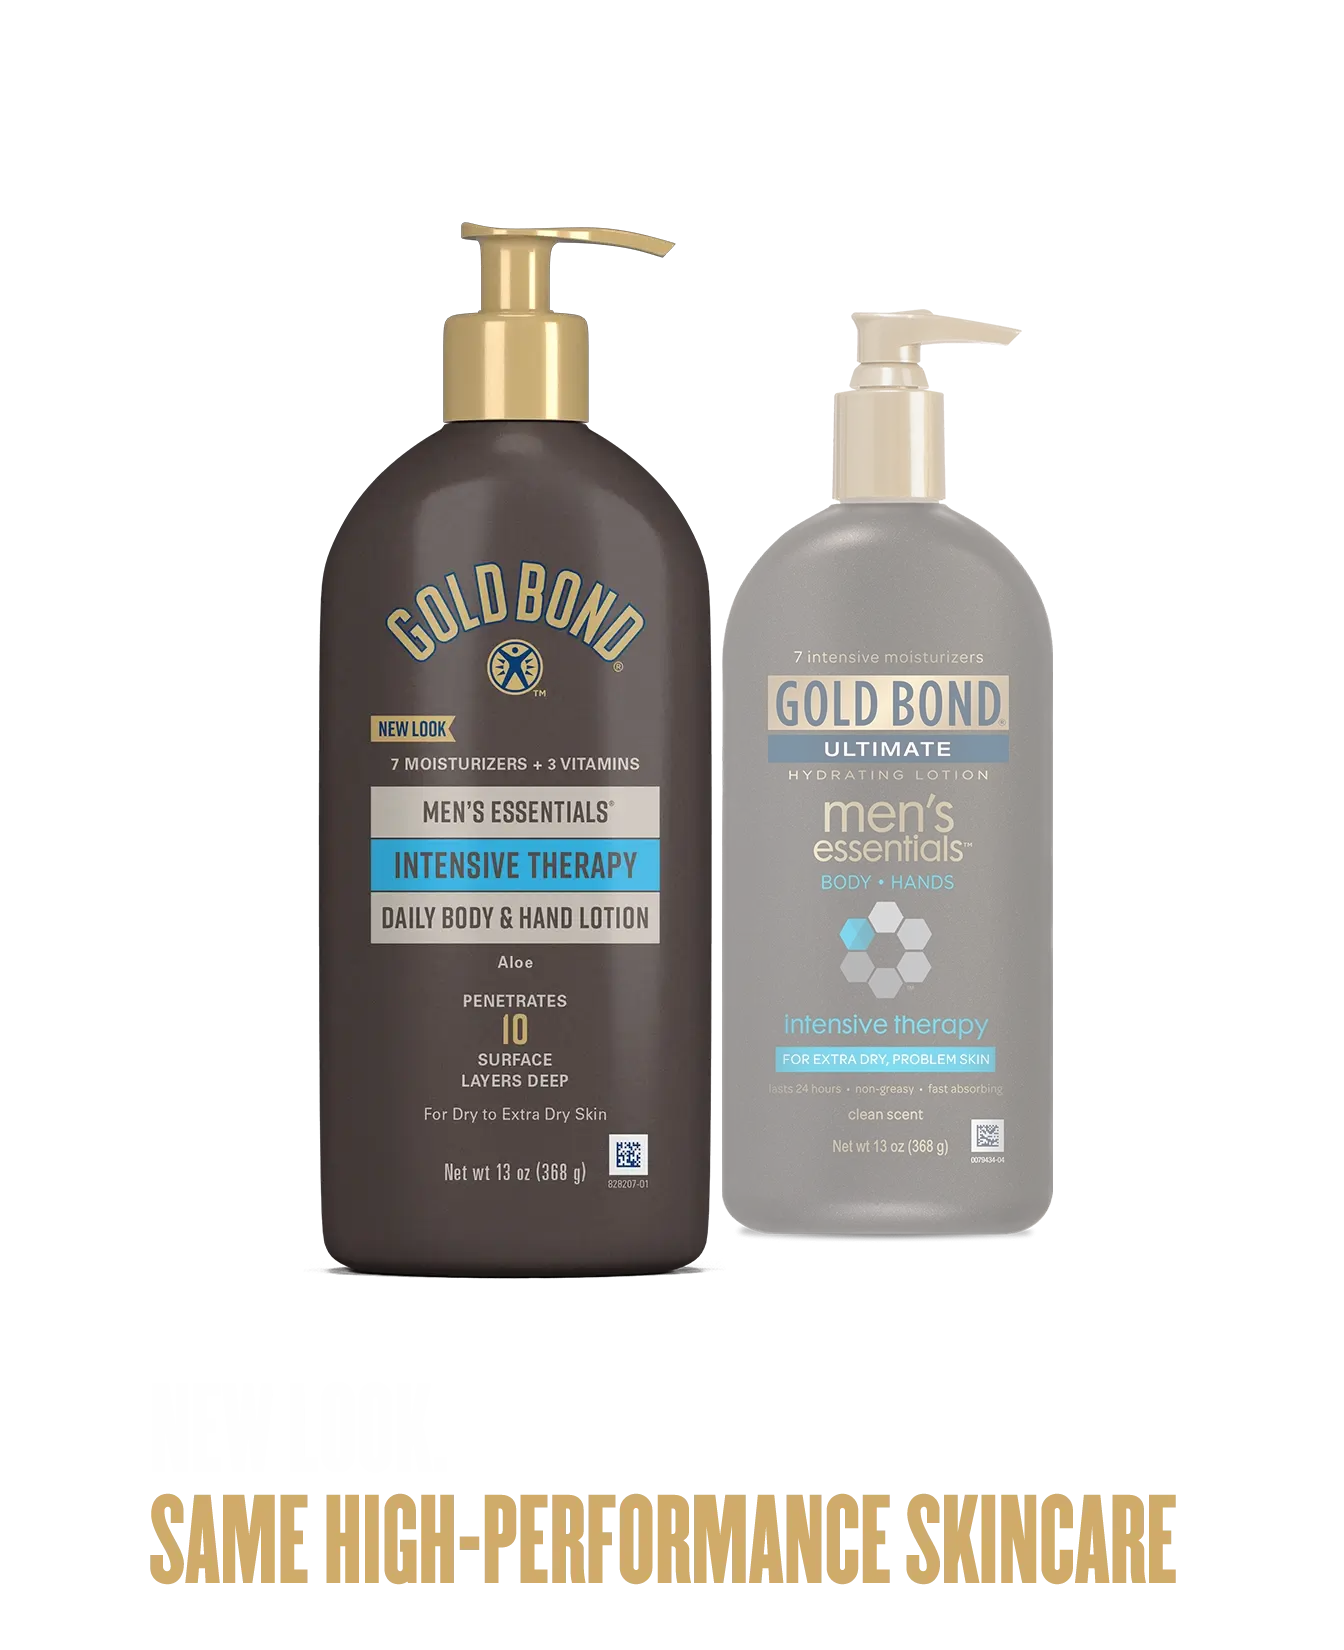 Men's Essentials Intensive Therapy Daily Body & Hand Lotion